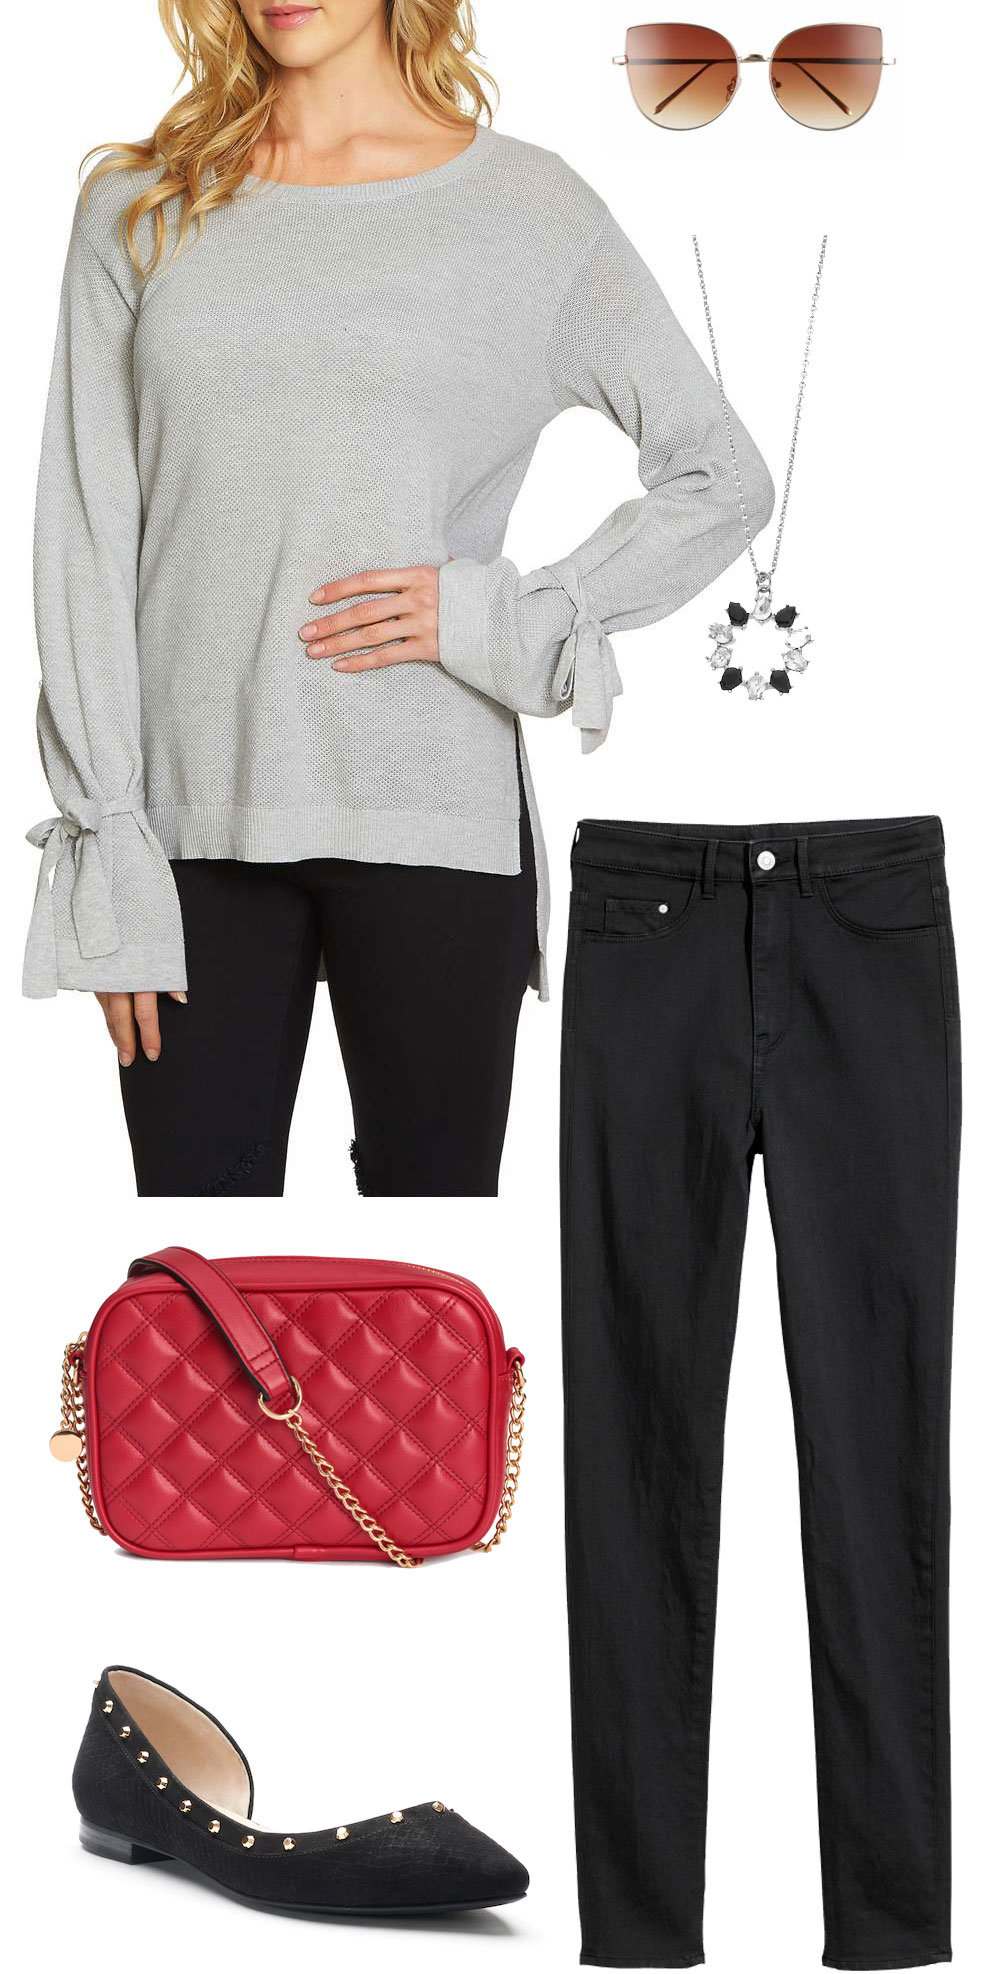 Jenna Dewan's tie-sleeve sweater, black pants and red bag look for less